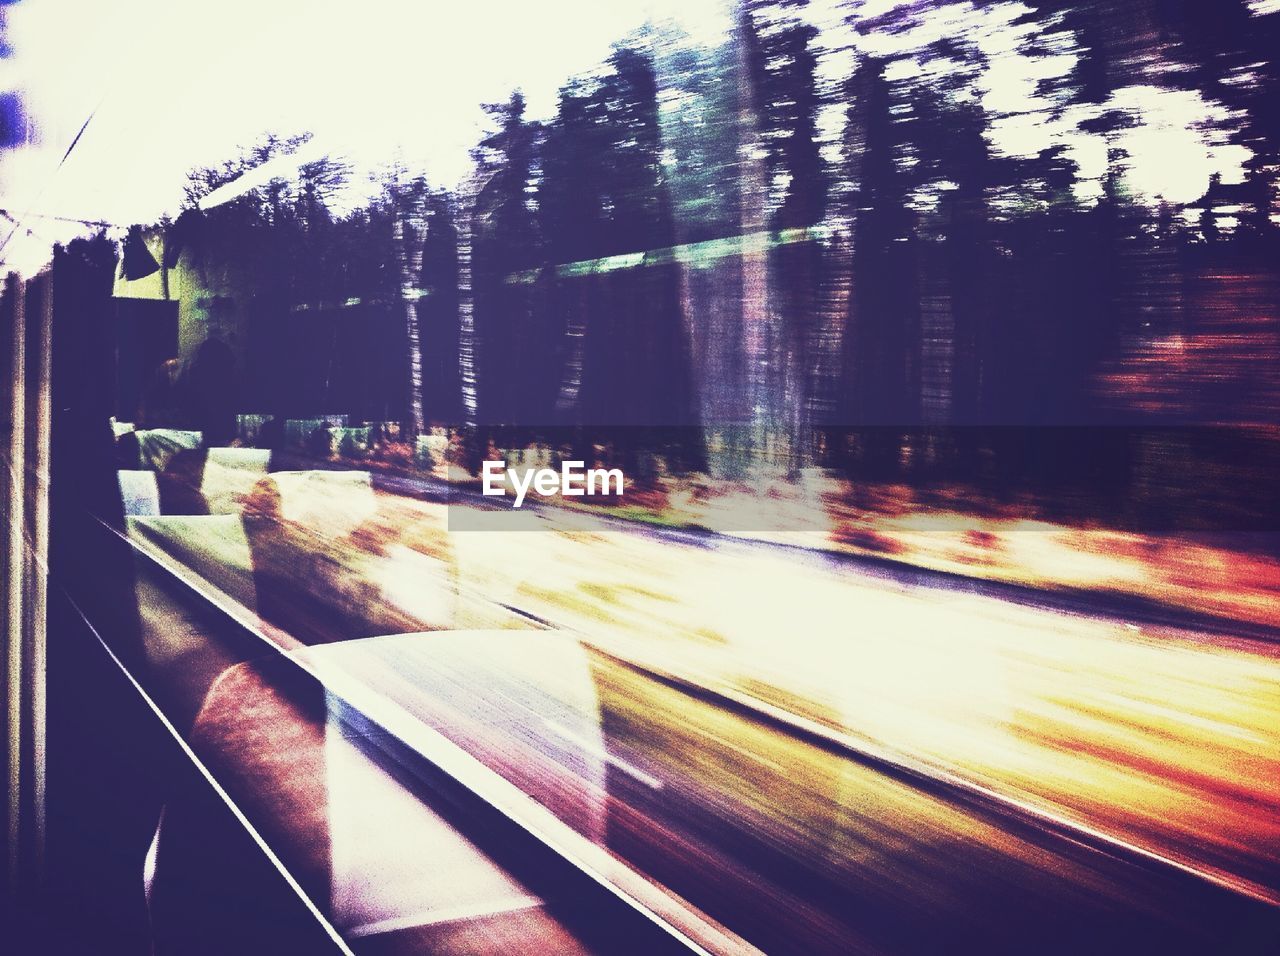 Blurred motion of trees and railroad tracks seen through train window